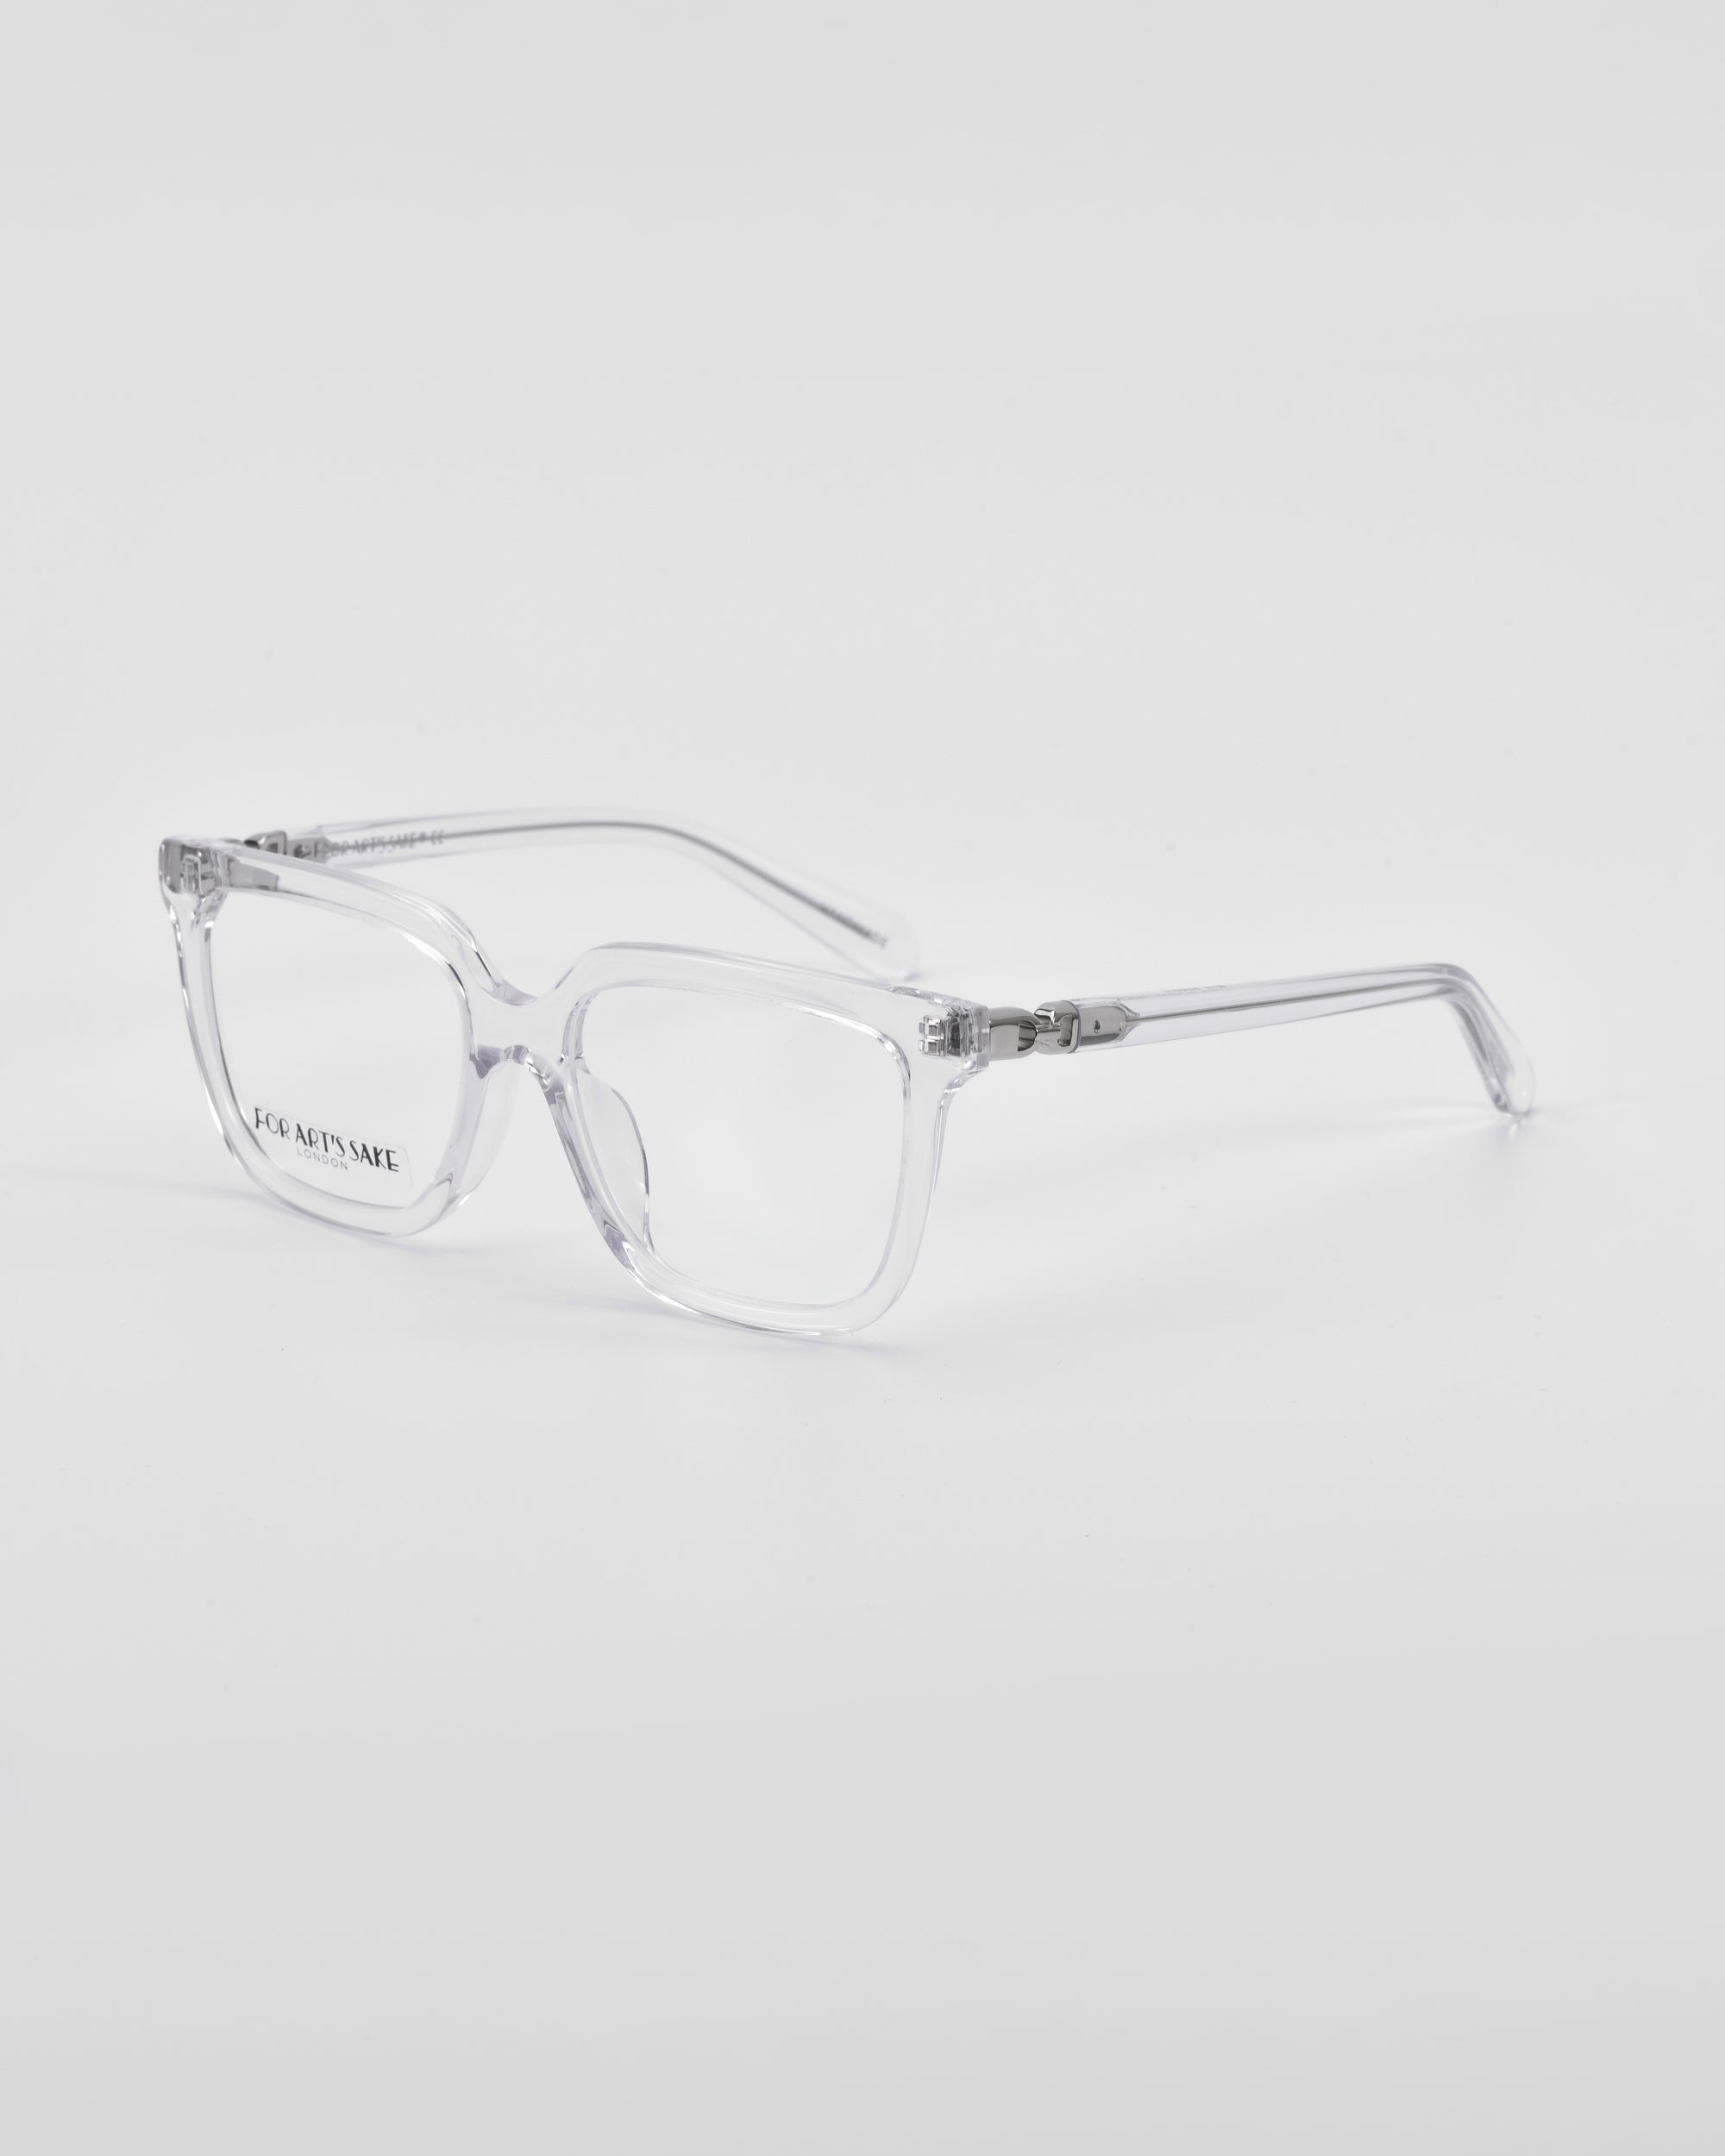 Clear, rectangular-framed eyeglasses with a classic square silhouette are displayed against a plain white background. The lenses have a slight tint, and the temples attach to the frame with small metal hinges. These stylish Nina frames by For Art&#39;s Sake® can be customized through our prescription service to meet your vision needs.